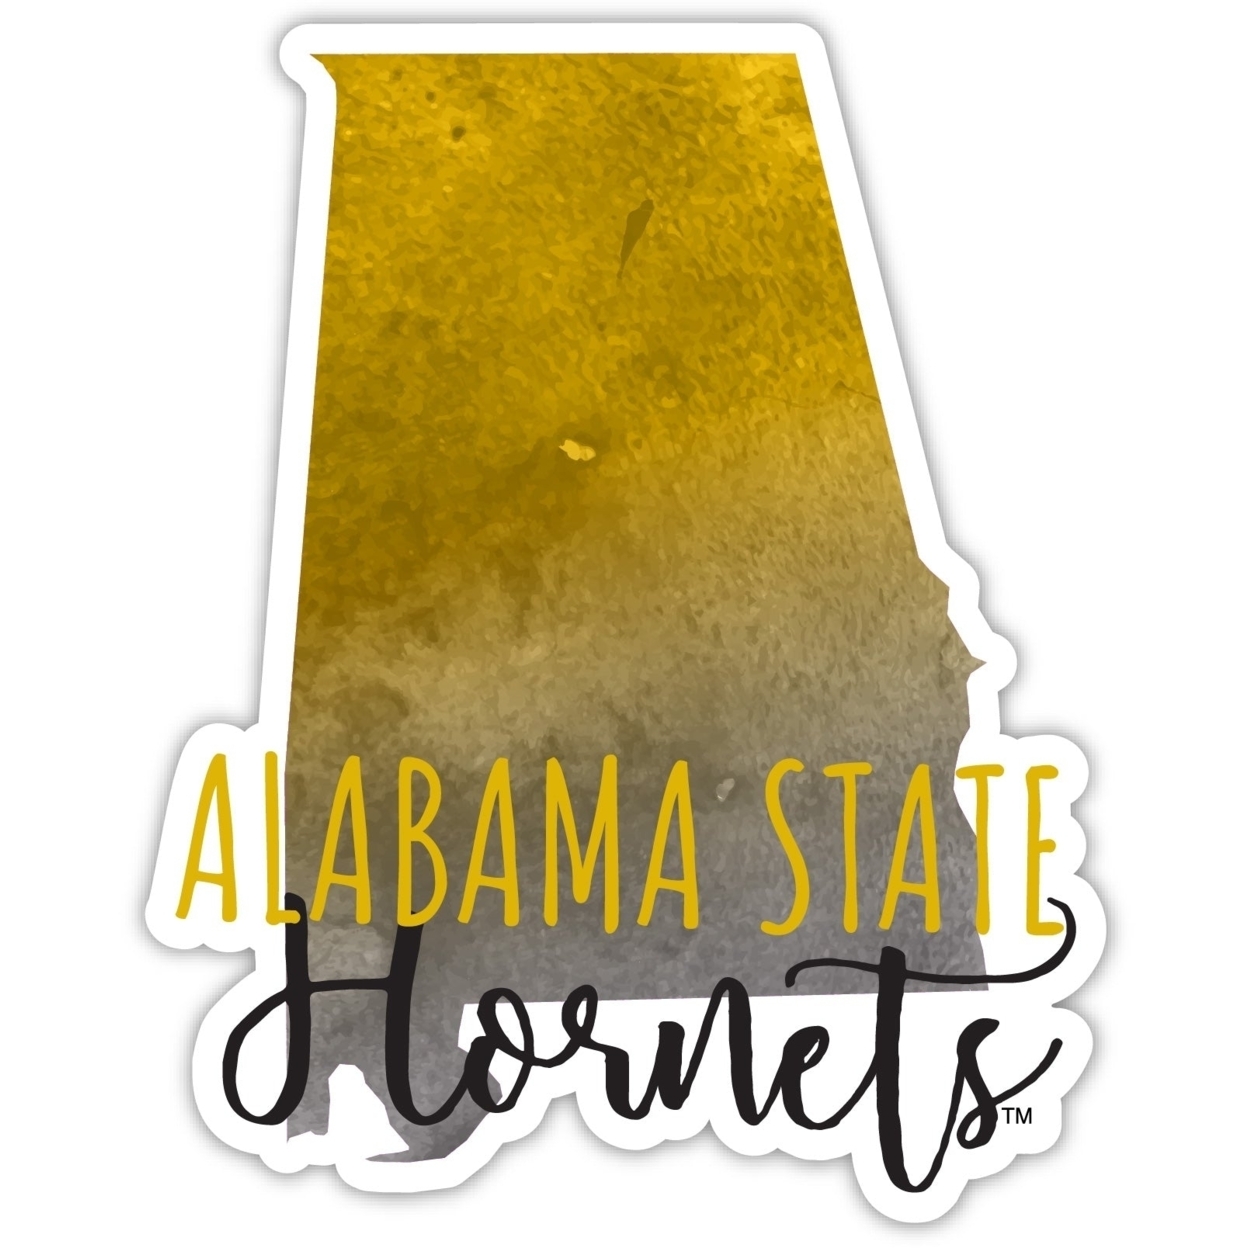 Alabama State University Watercolor State Die Cut Decal